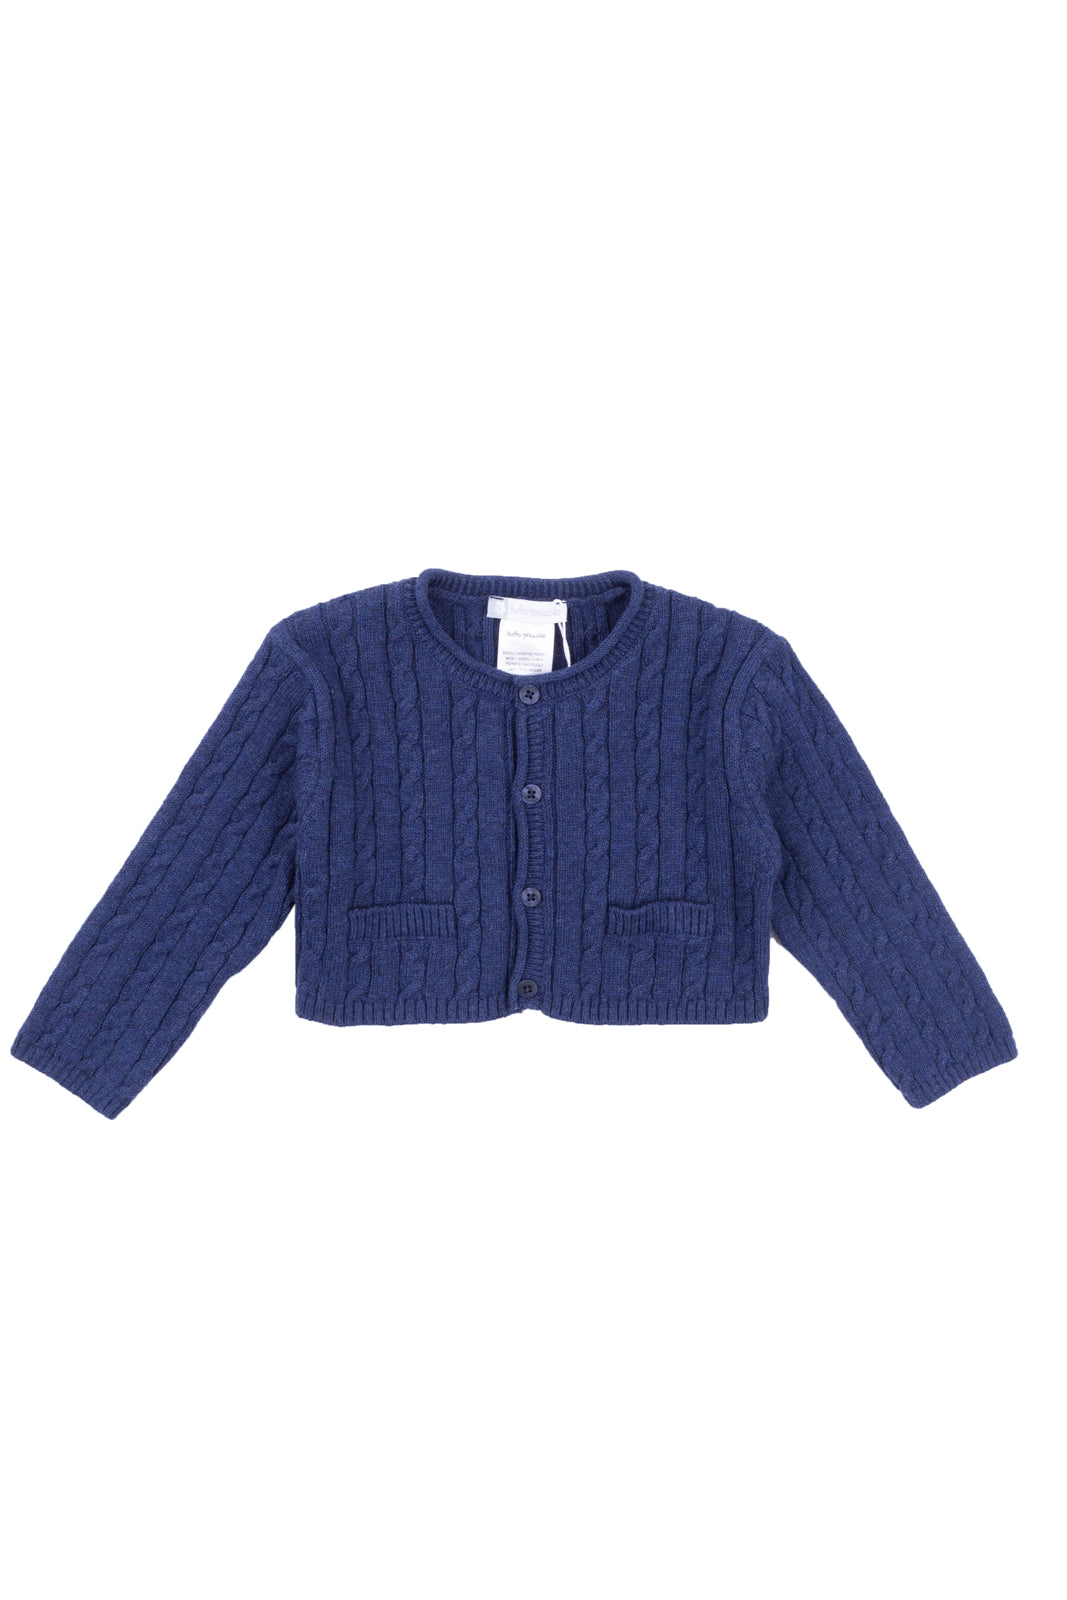 TUTTO PICCOLO Cardigan Size 12M / 74CM Angora Wool Blend Cable Knit Button Front gallery main photo